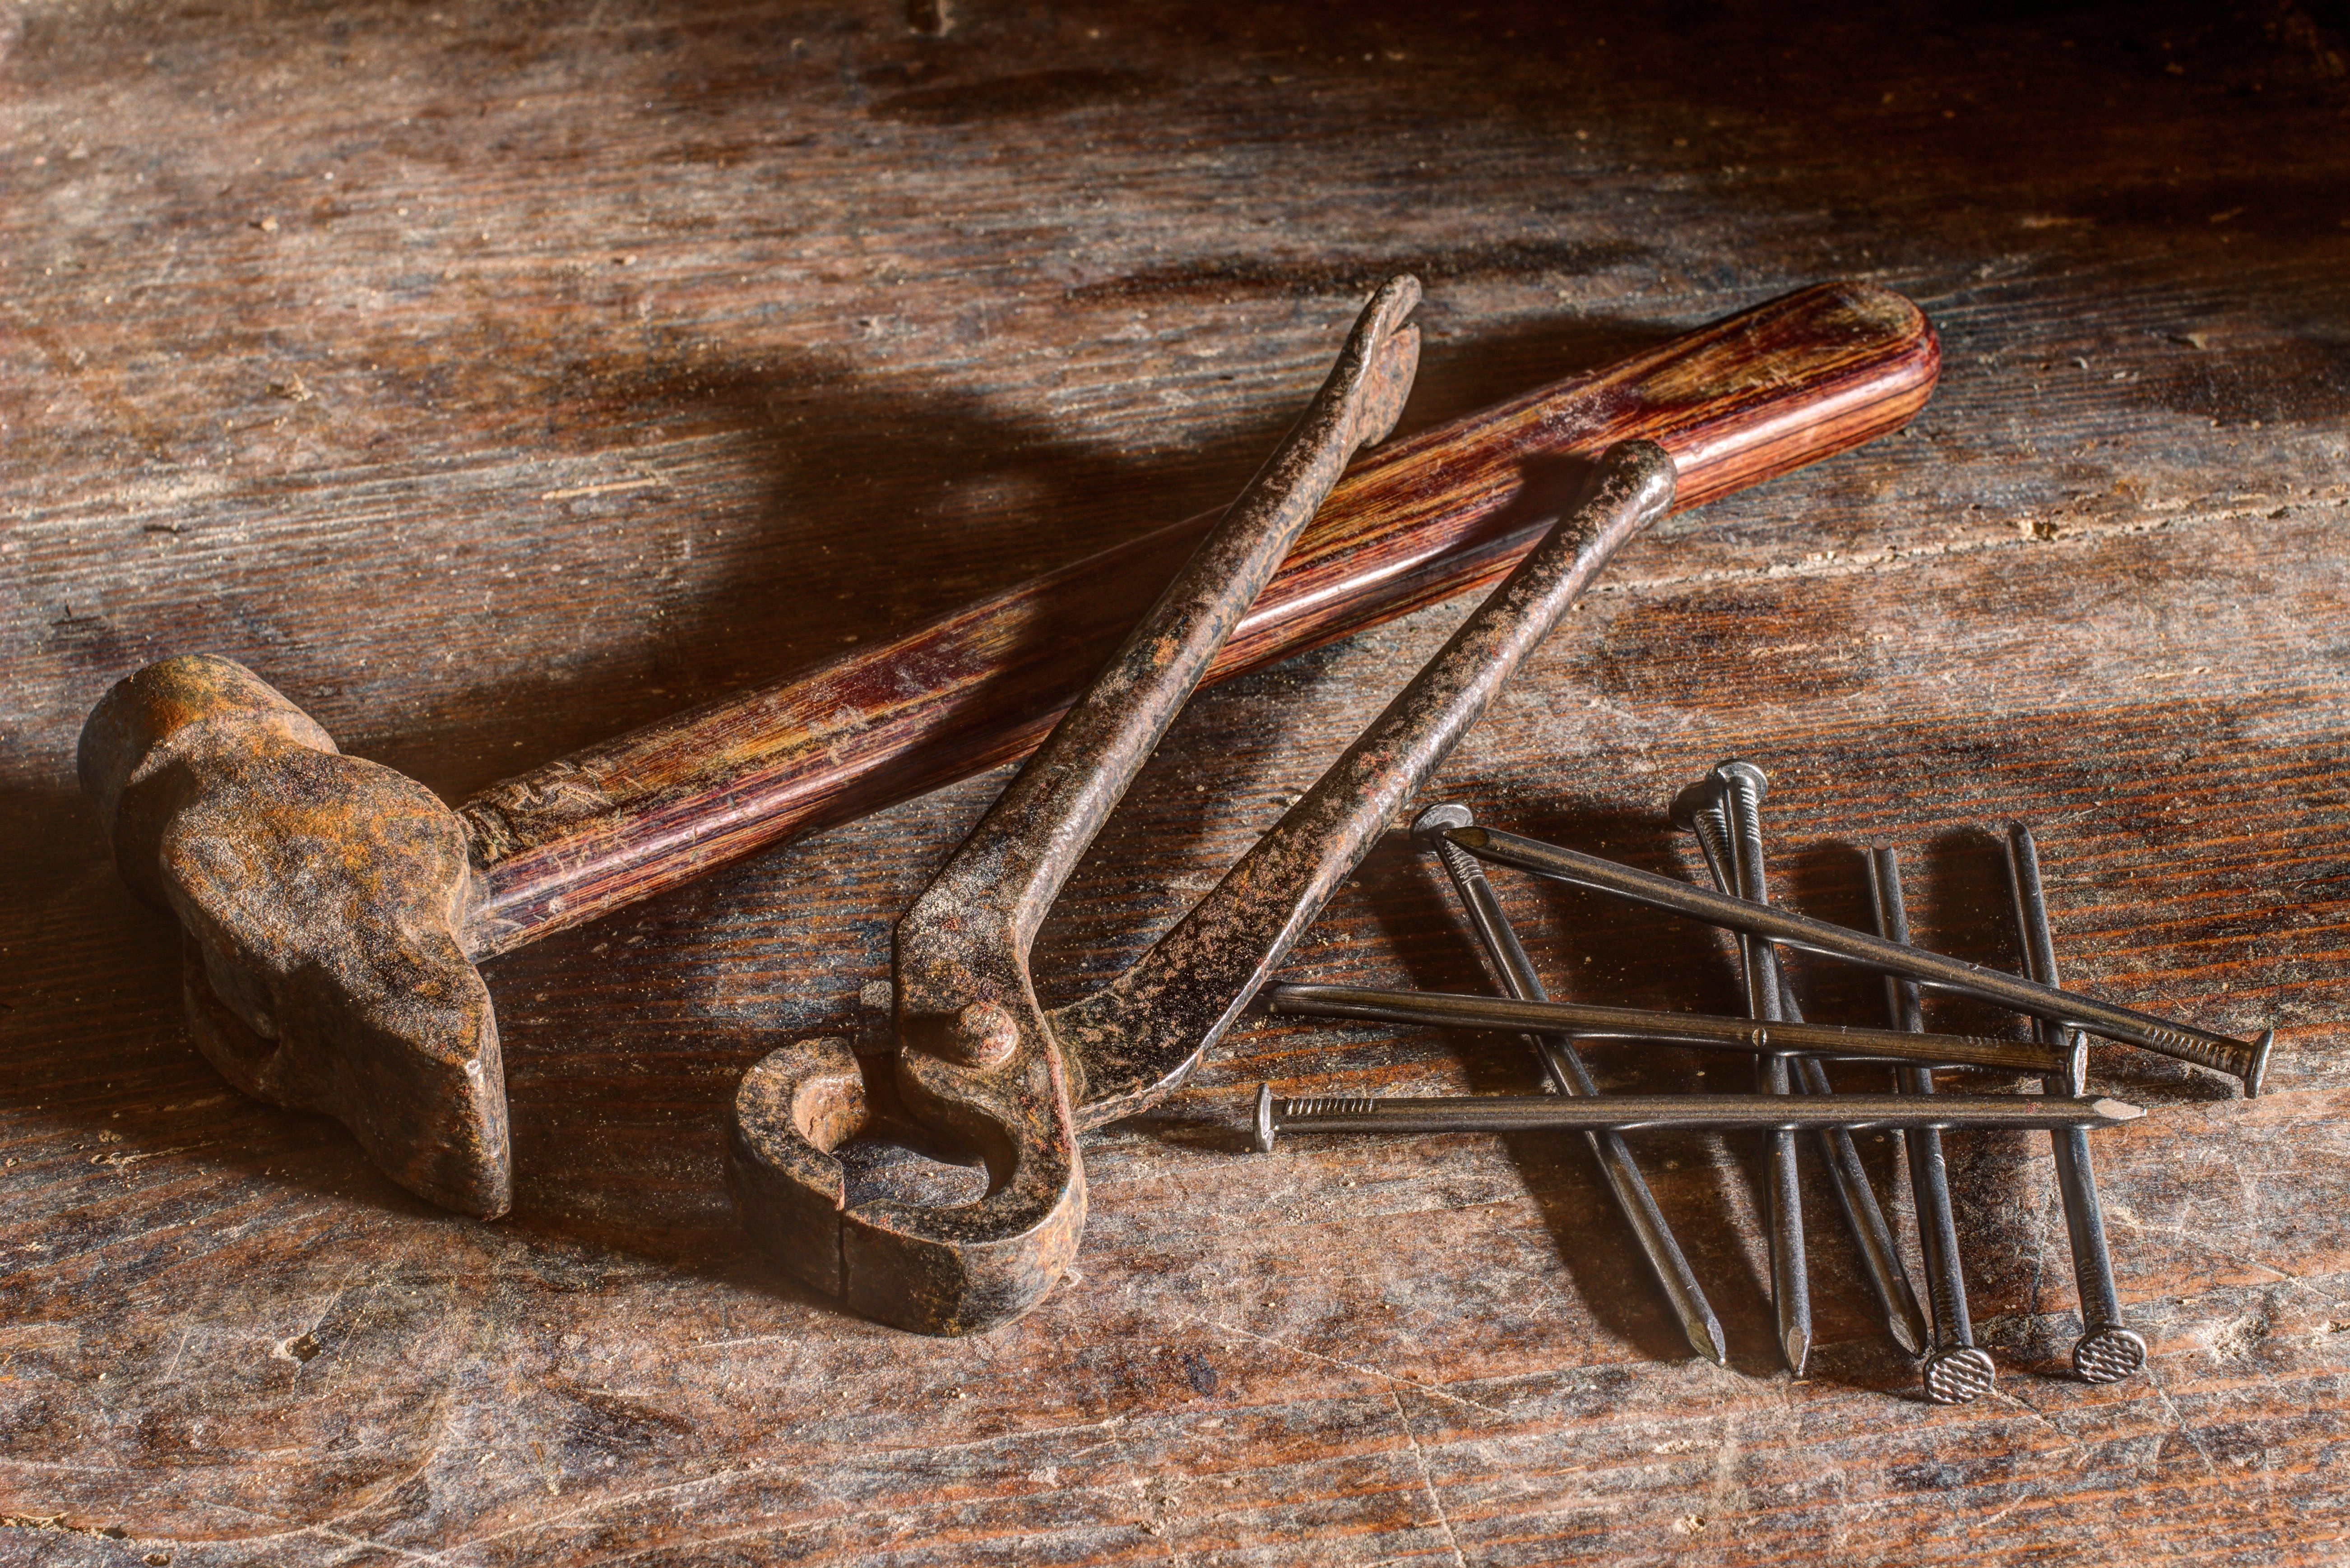 Tips for Organizing Your Tool Room & Laundry Room (& Basic Tools You Should Own)